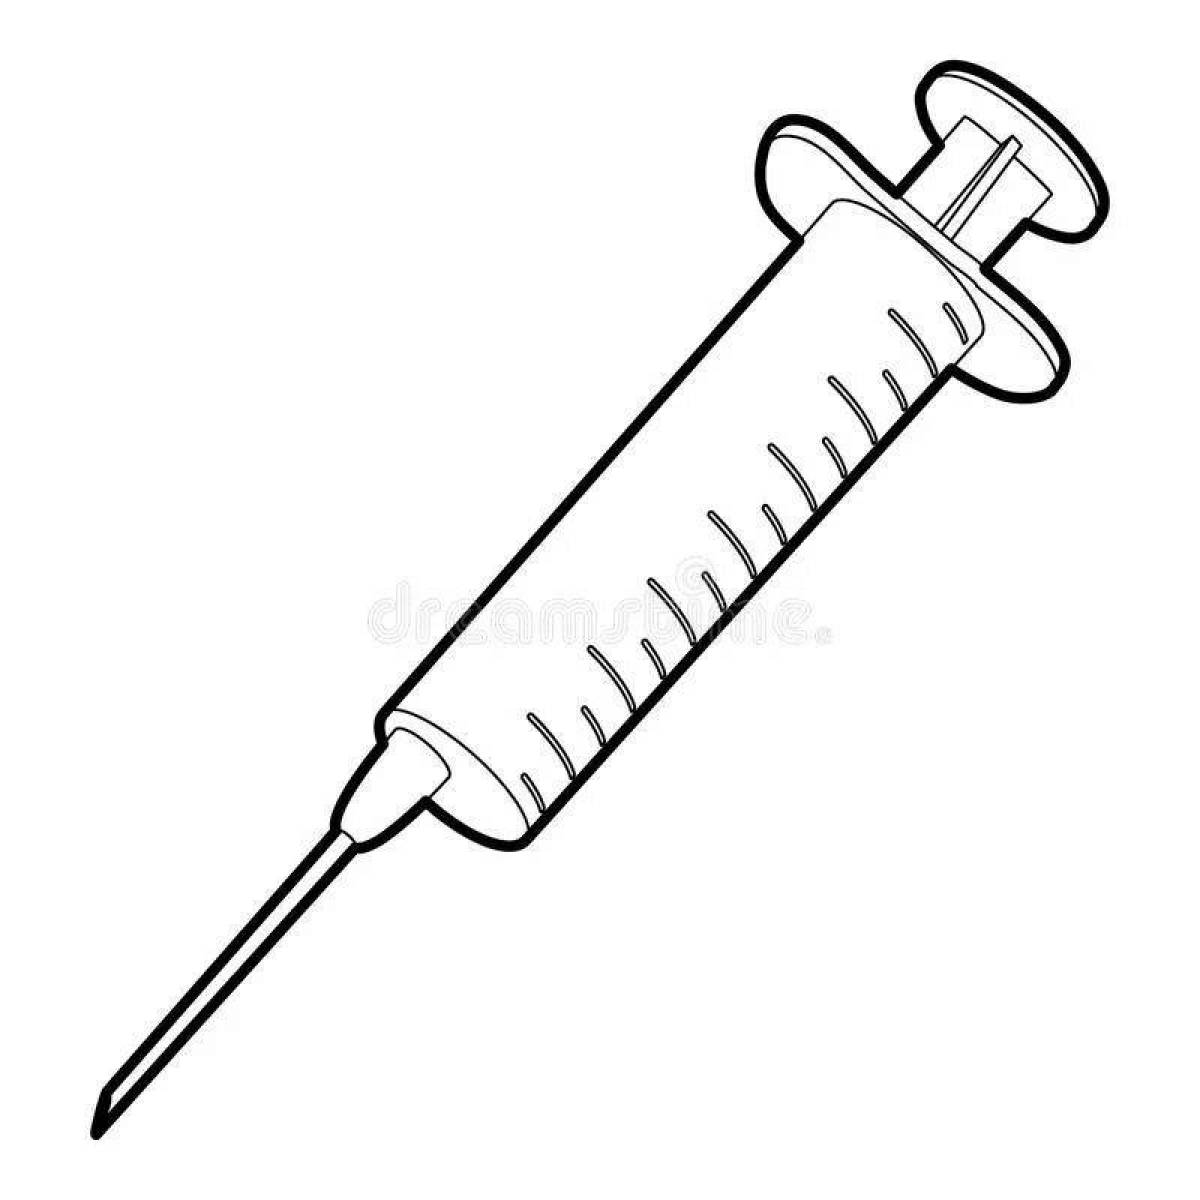 Adorable syringe coloring page